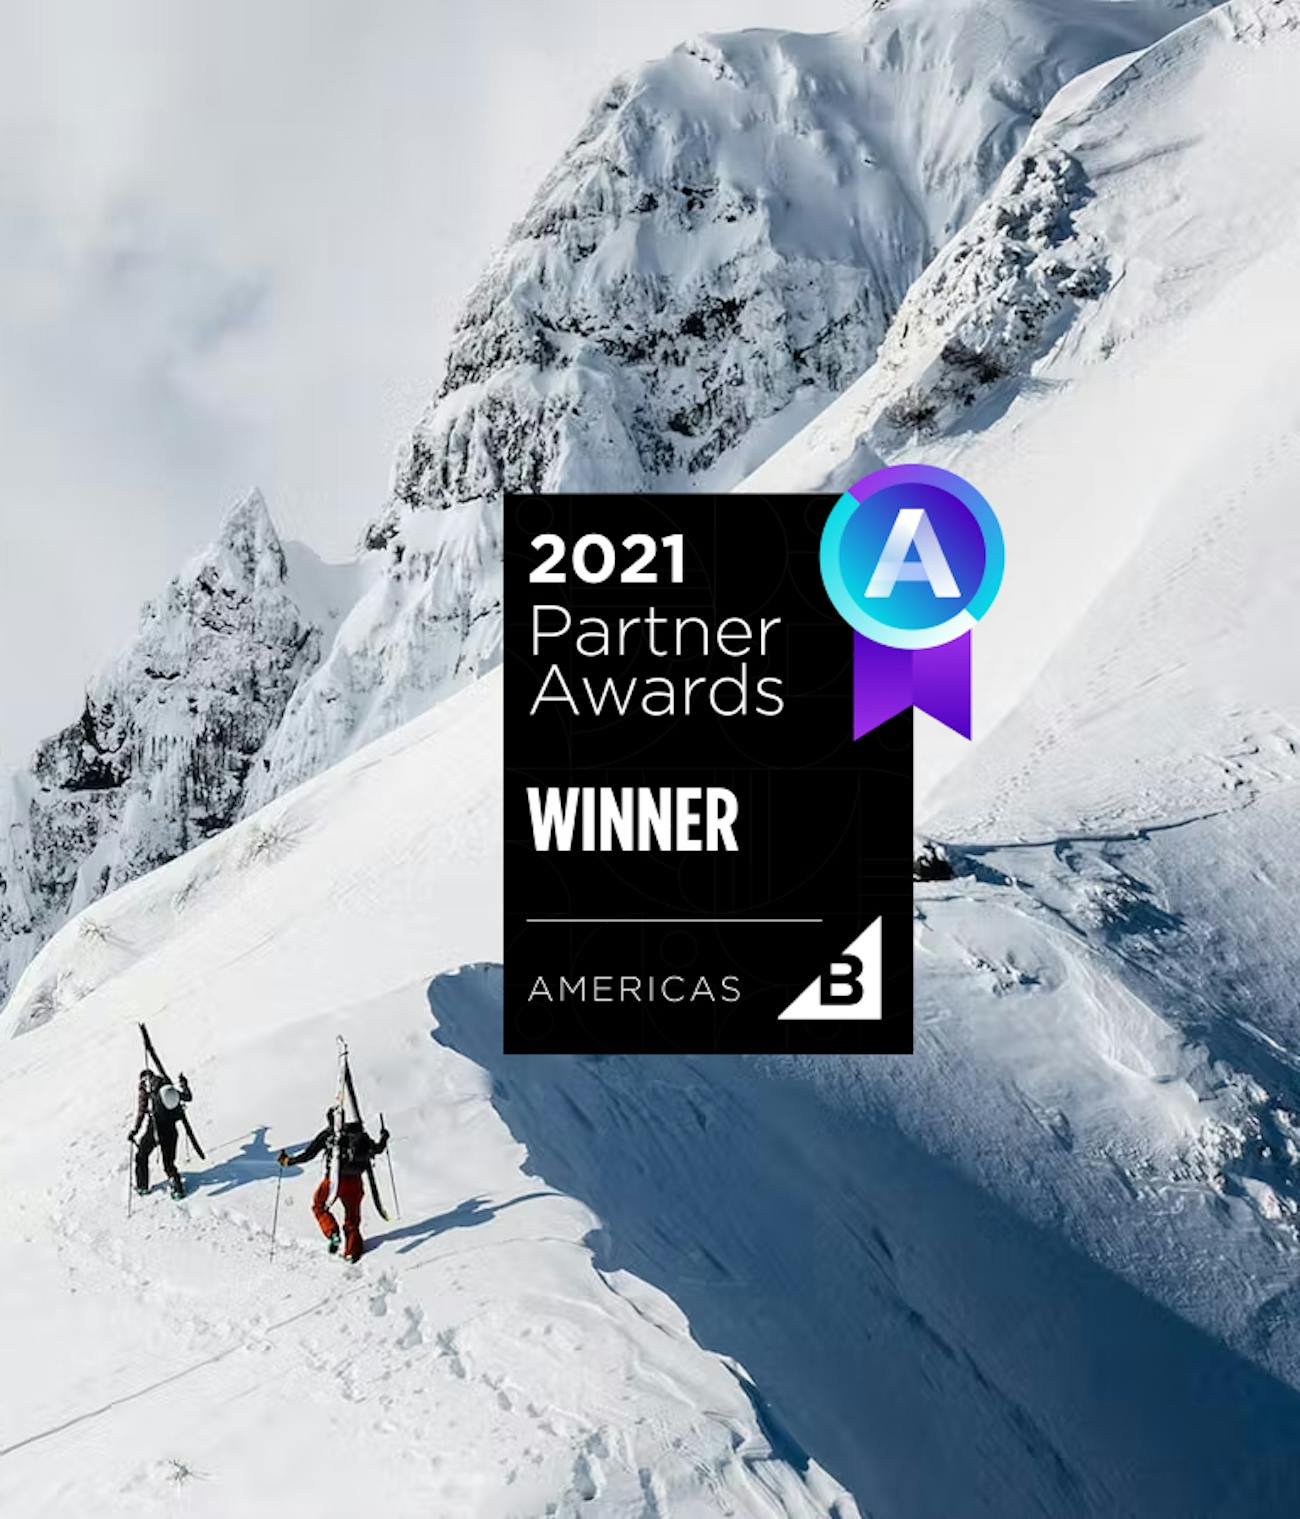 2021 Partner Award graphic over image of two skiers